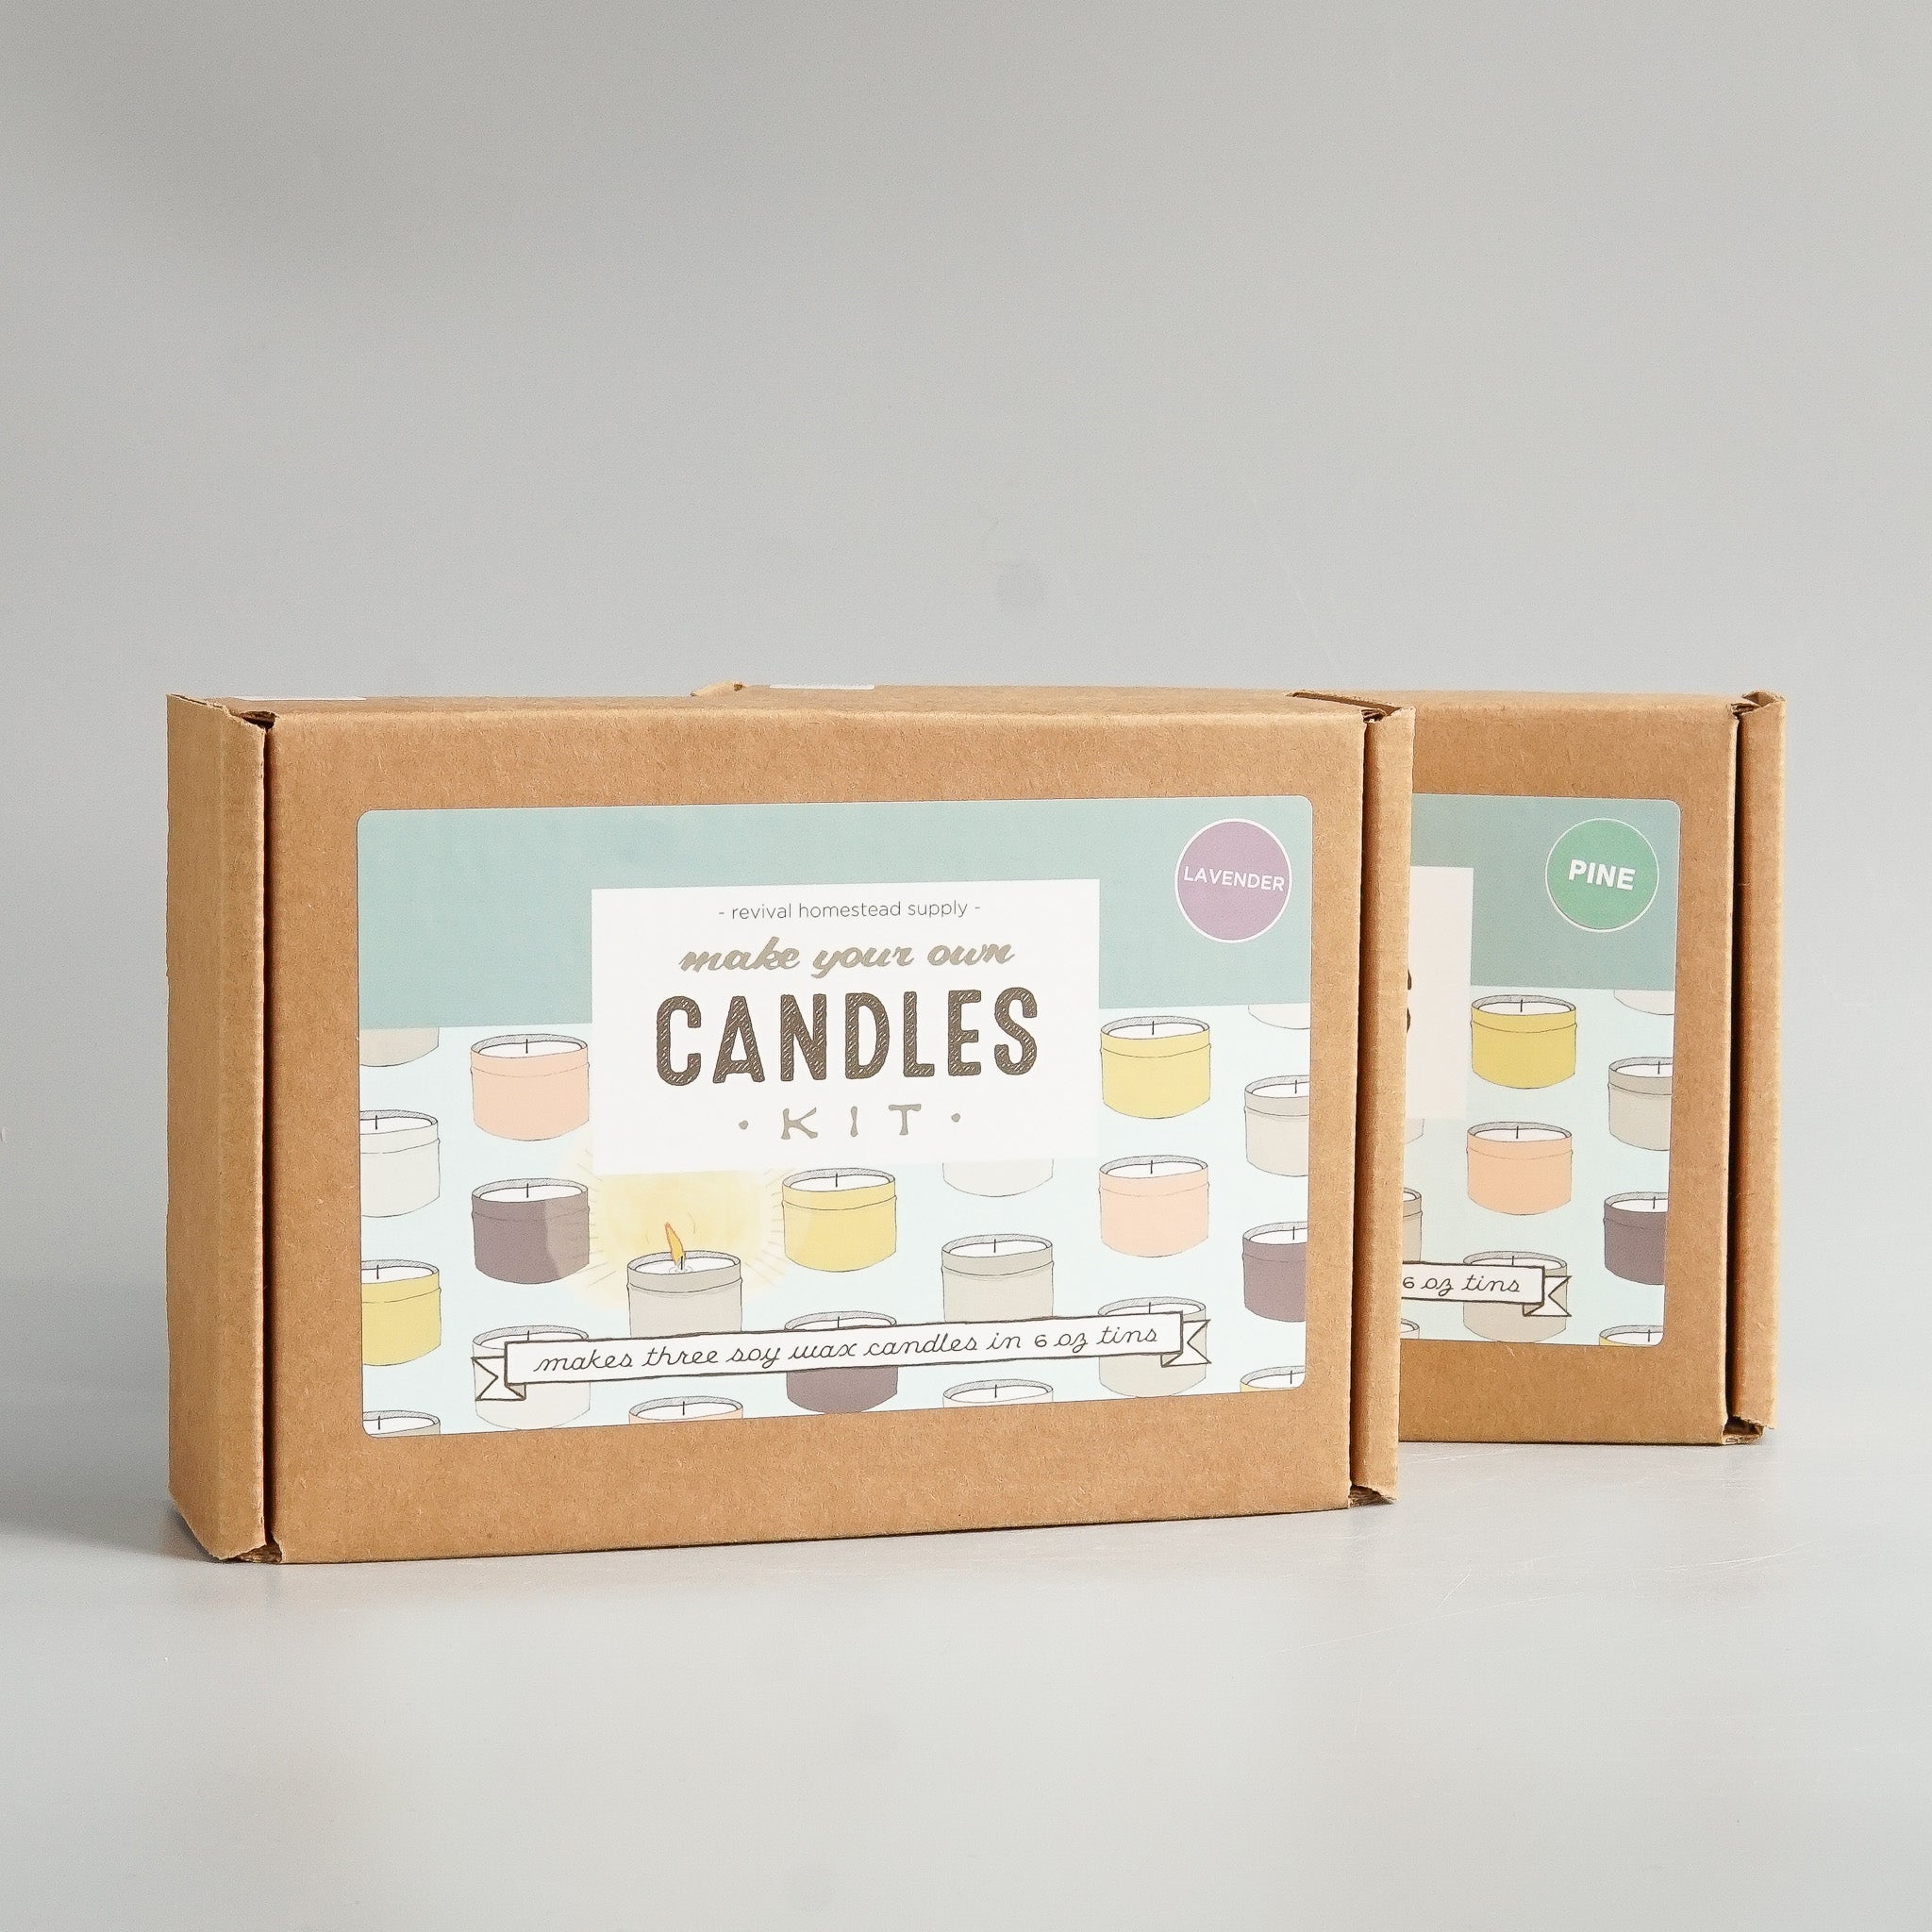 Revival Homestead Supply: Soy Candle Kit